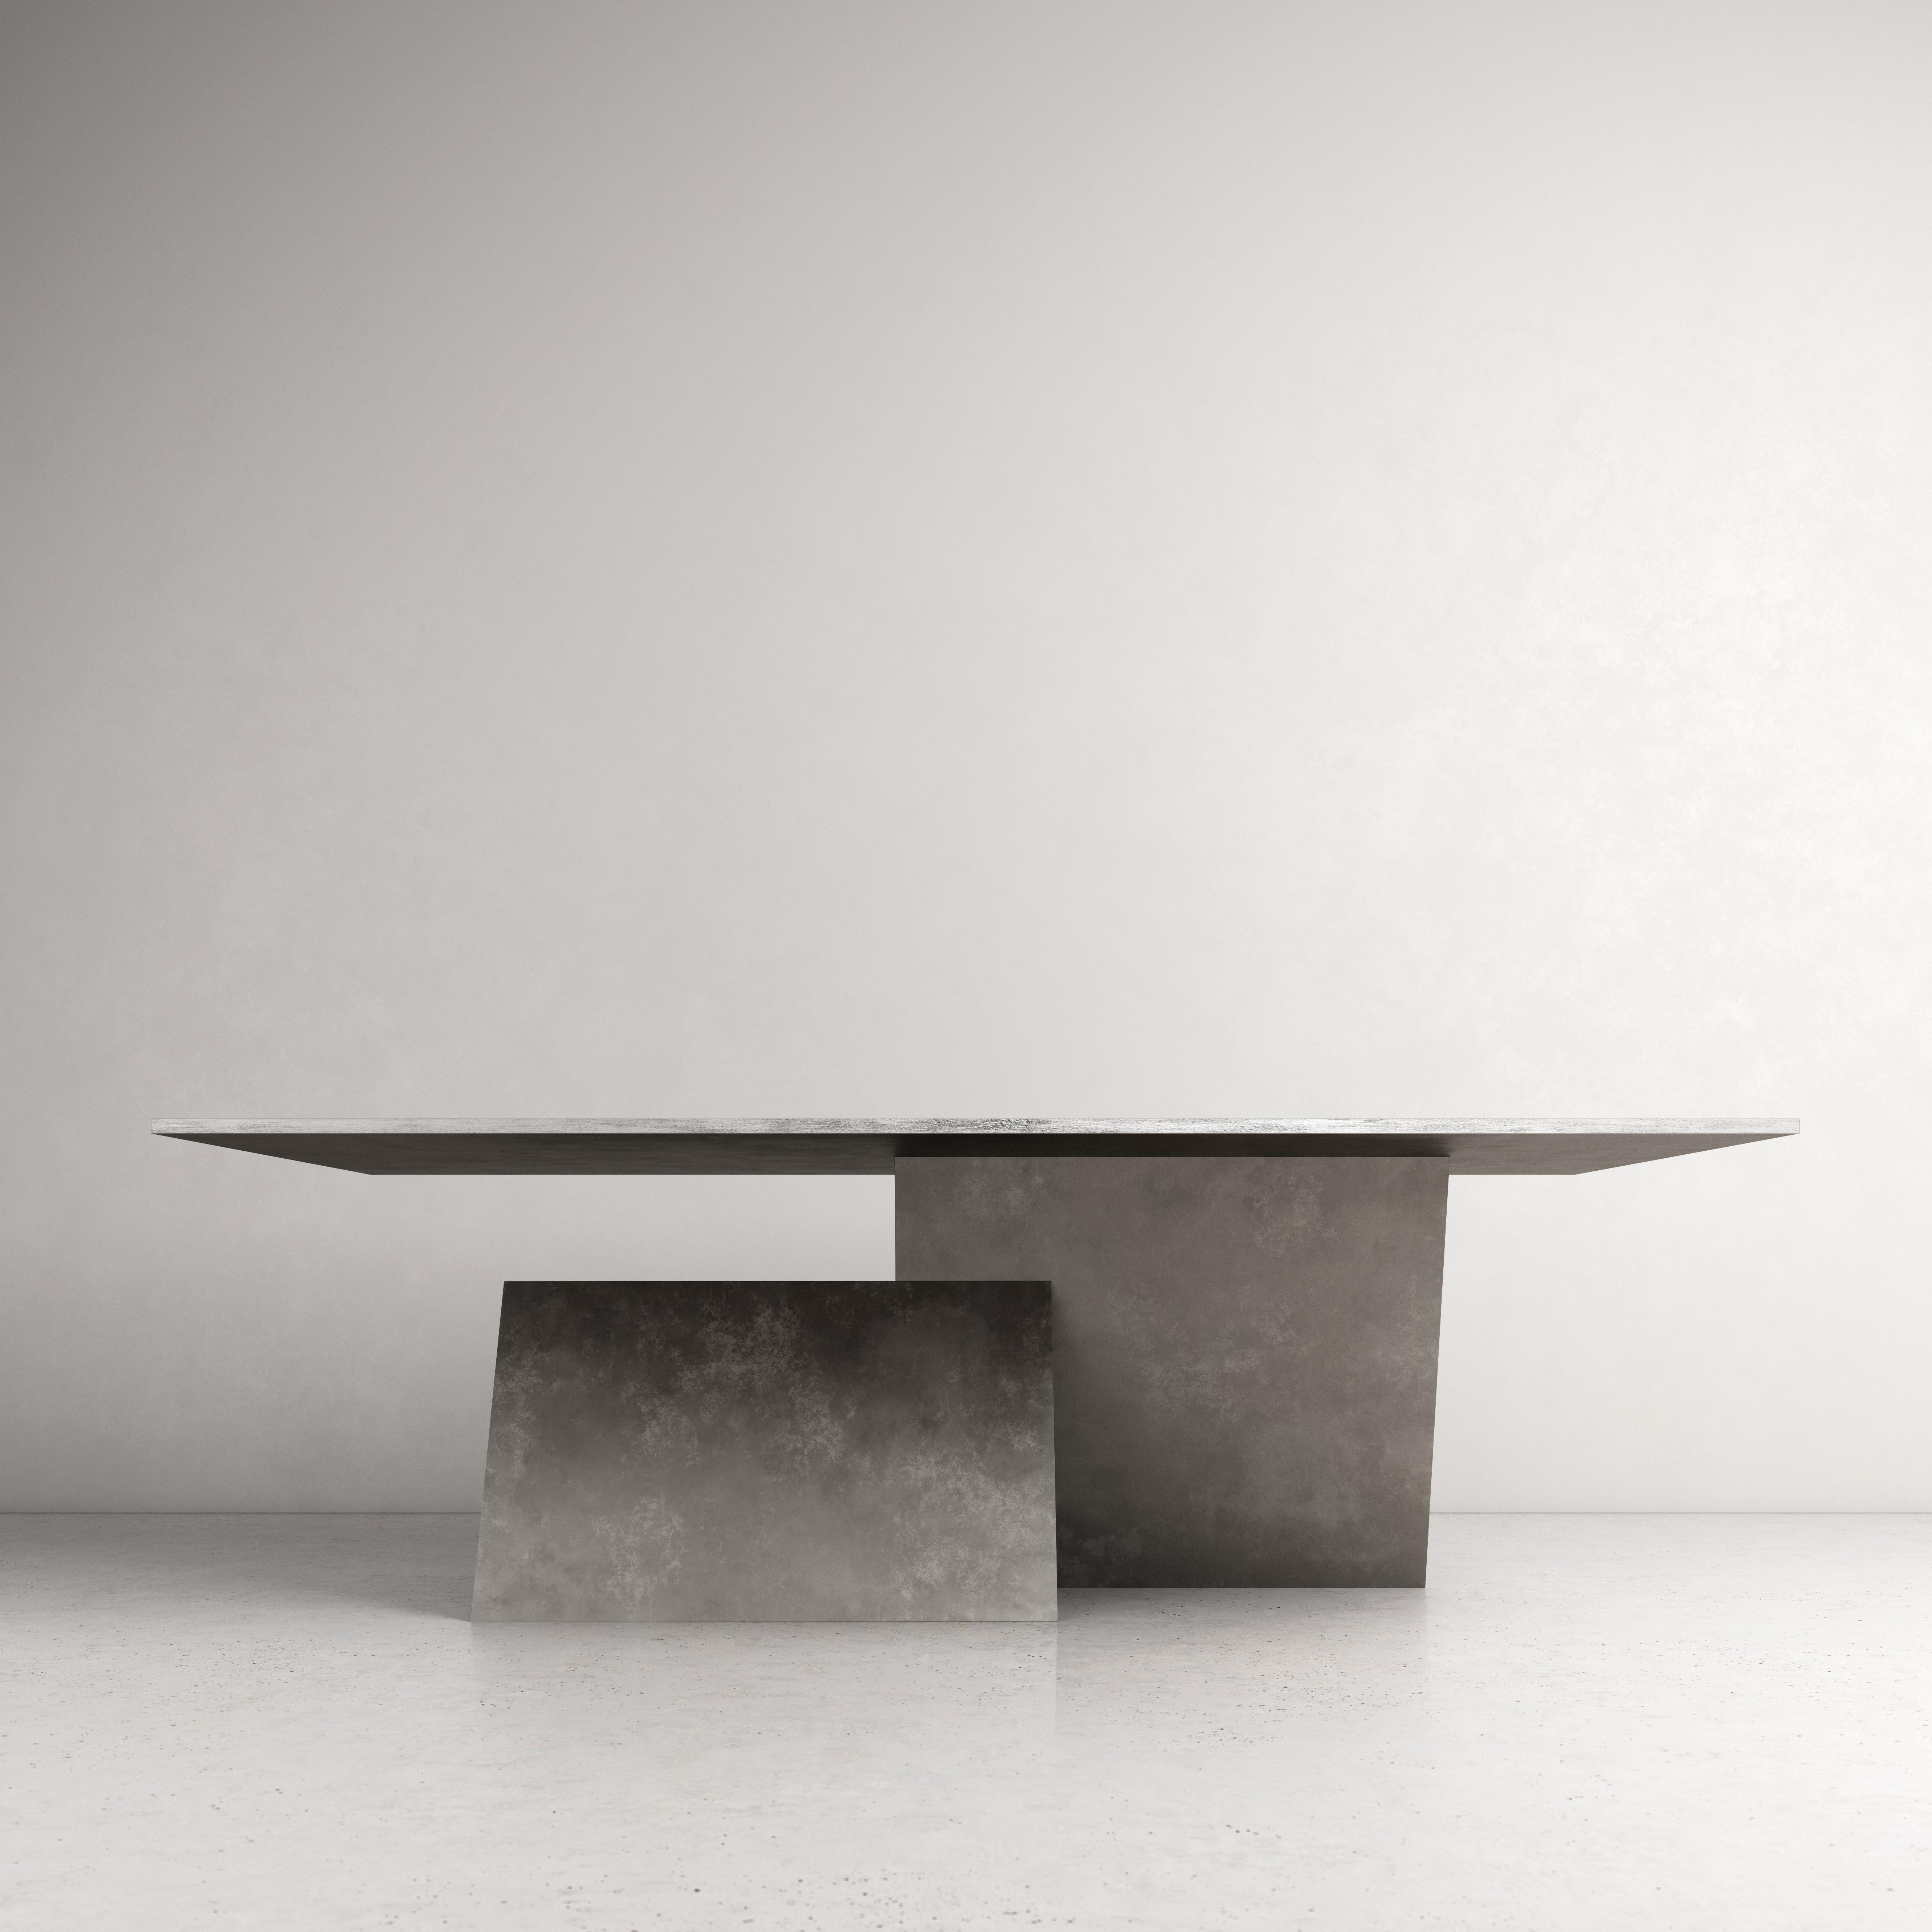 Contemporary table Y by dAM Atelier
Dimensions: L 220 x W 110 x H 73
Materials: Delabrè stainless steel
Also available in verdegris copper, please contact us.

dAM atelier is a duo of young Italian architects sharing the passion for design and